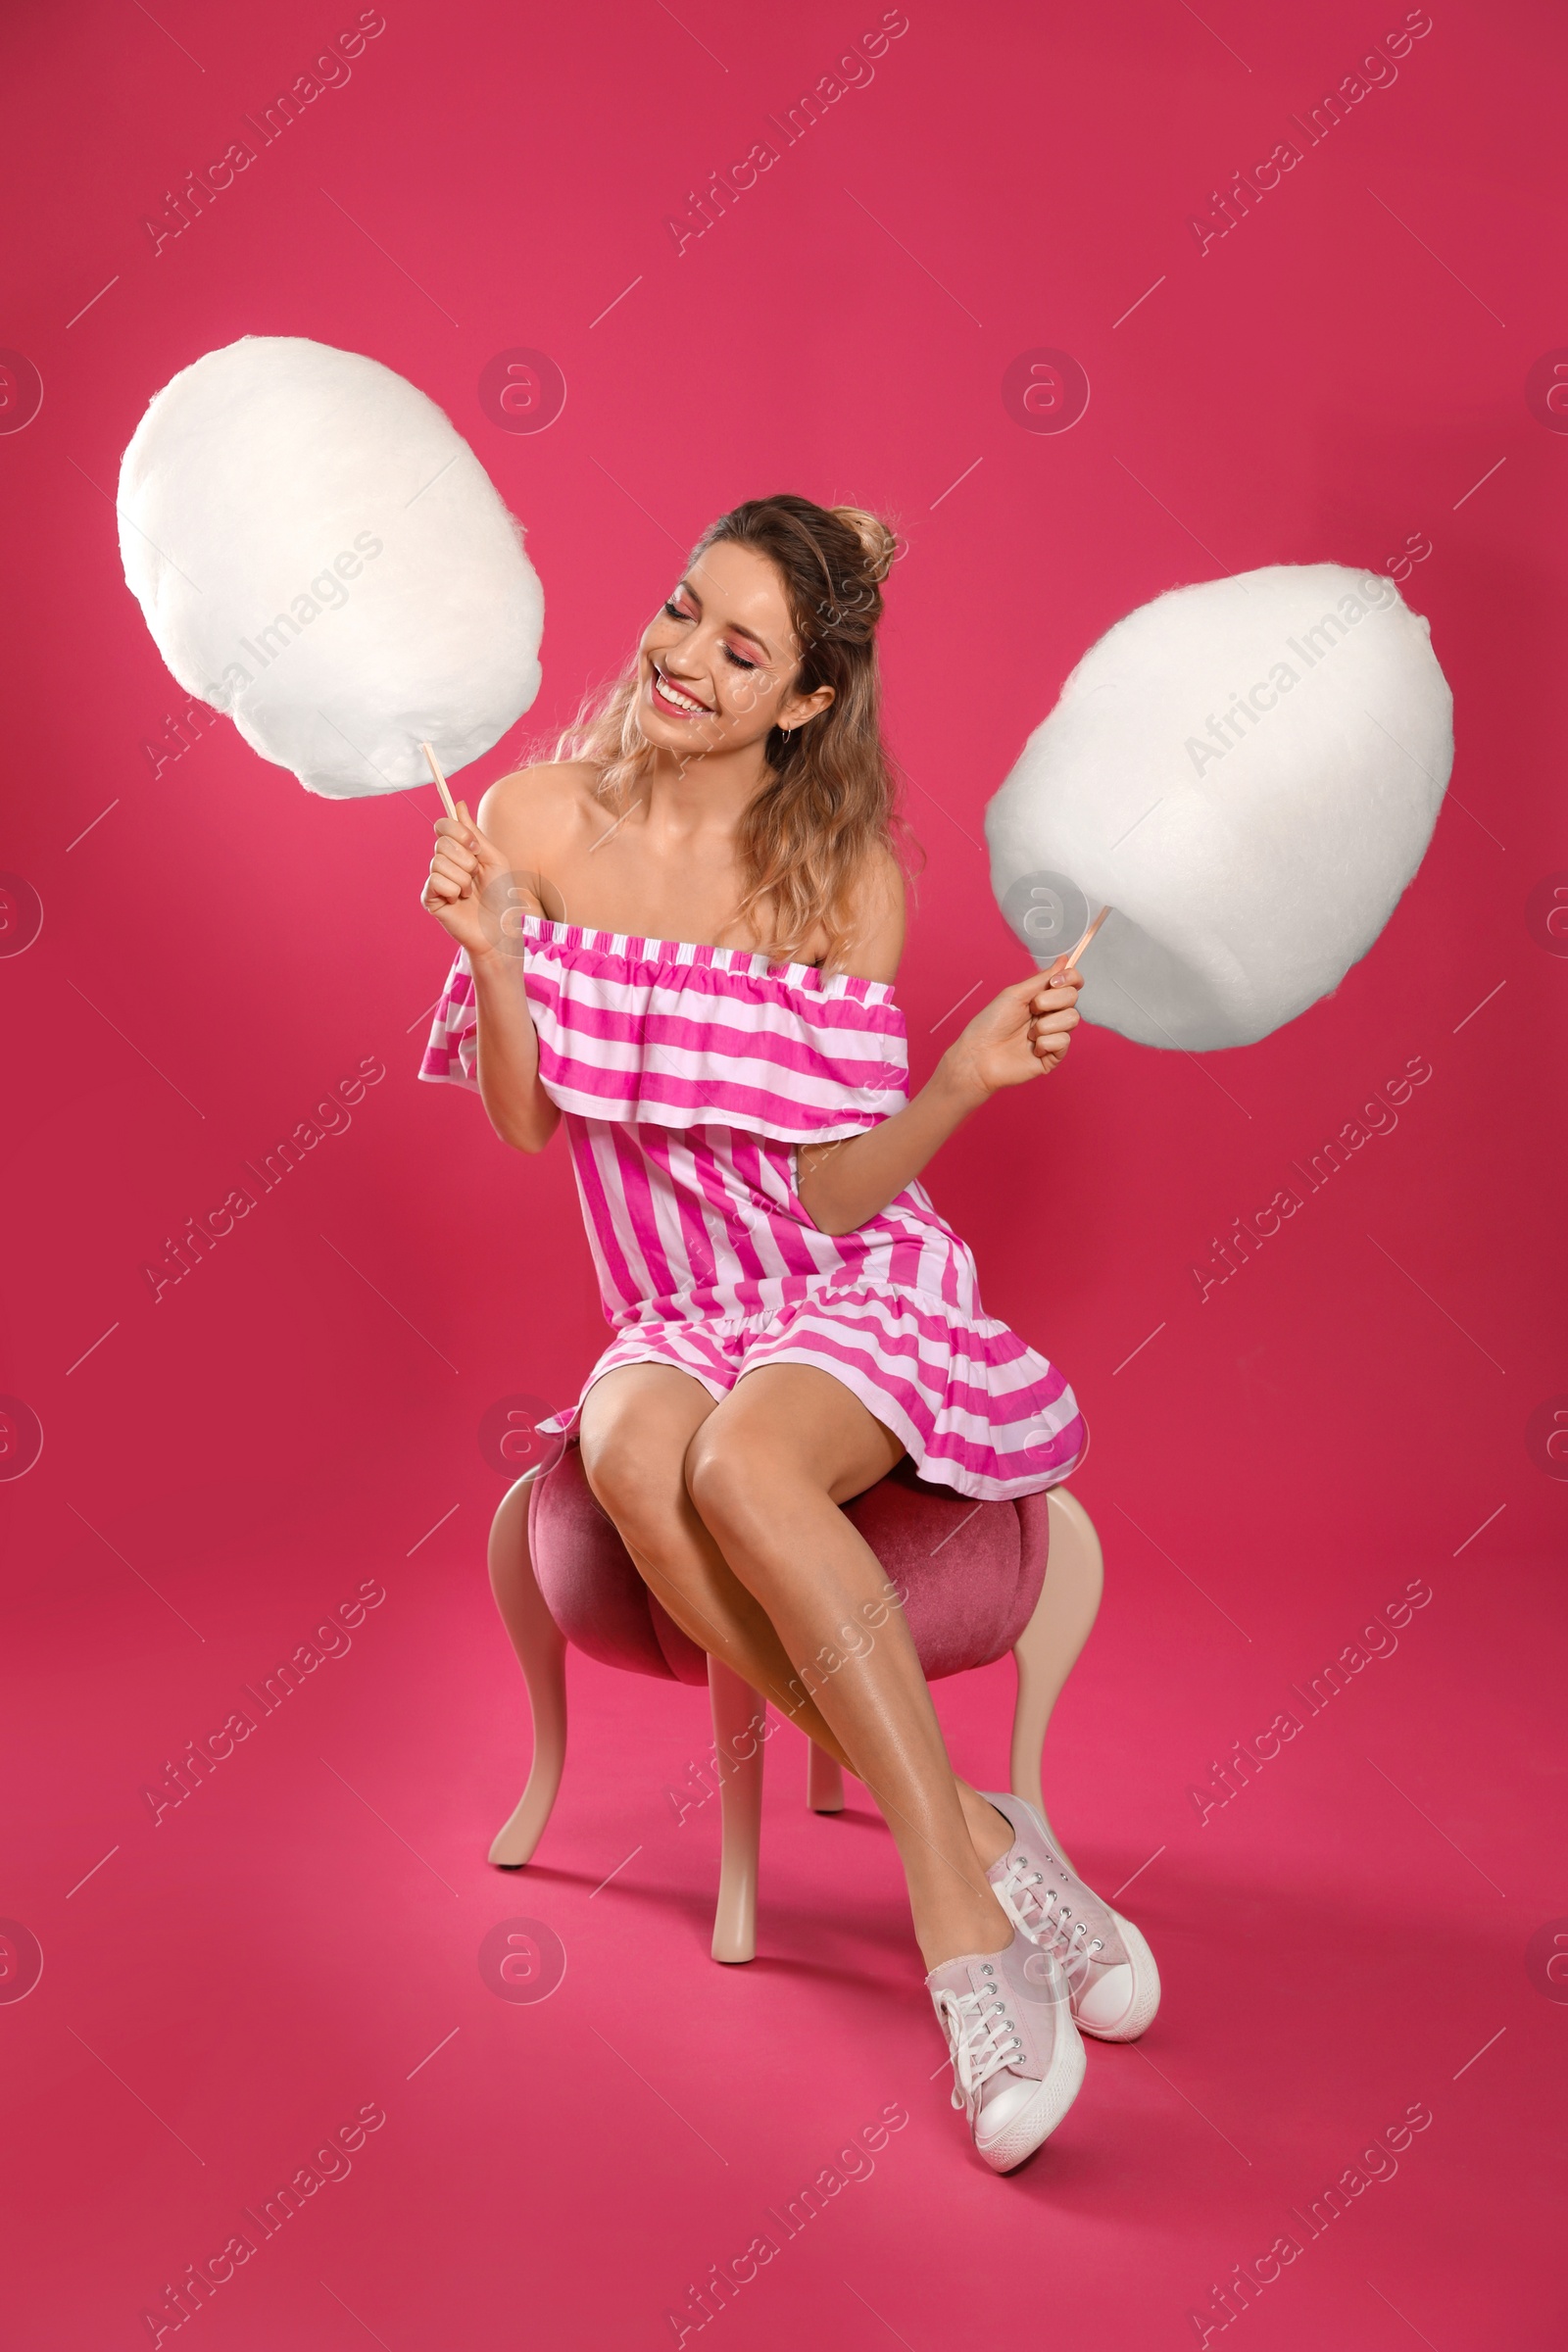 Photo of Full length portrait of young woman with tasty cotton candy sitting on pouf, pink background